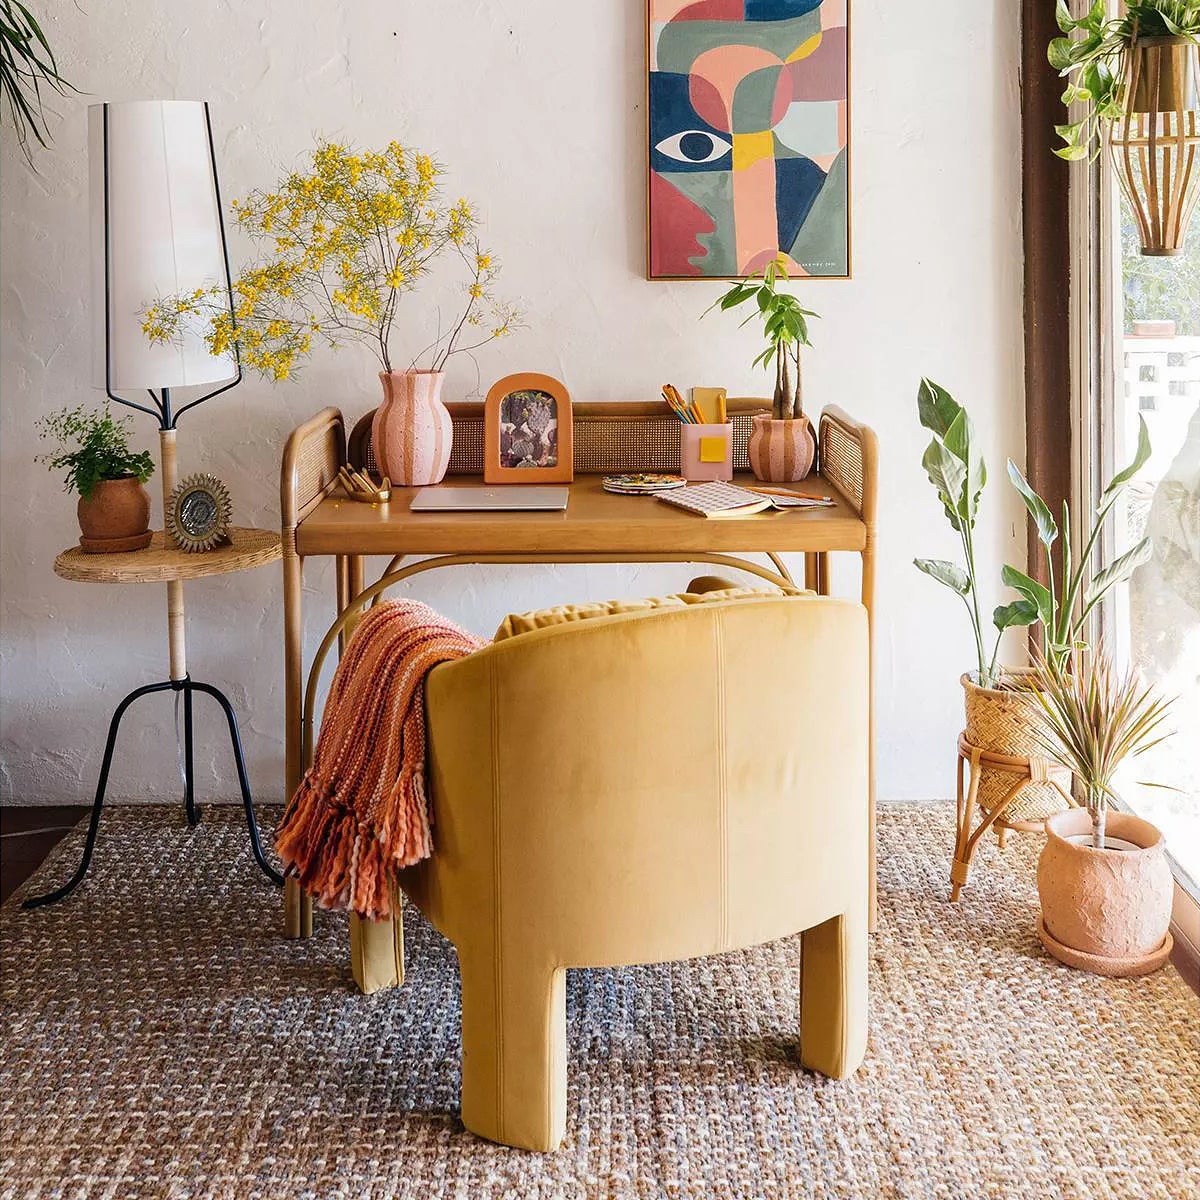 Desk and chair in a boho space